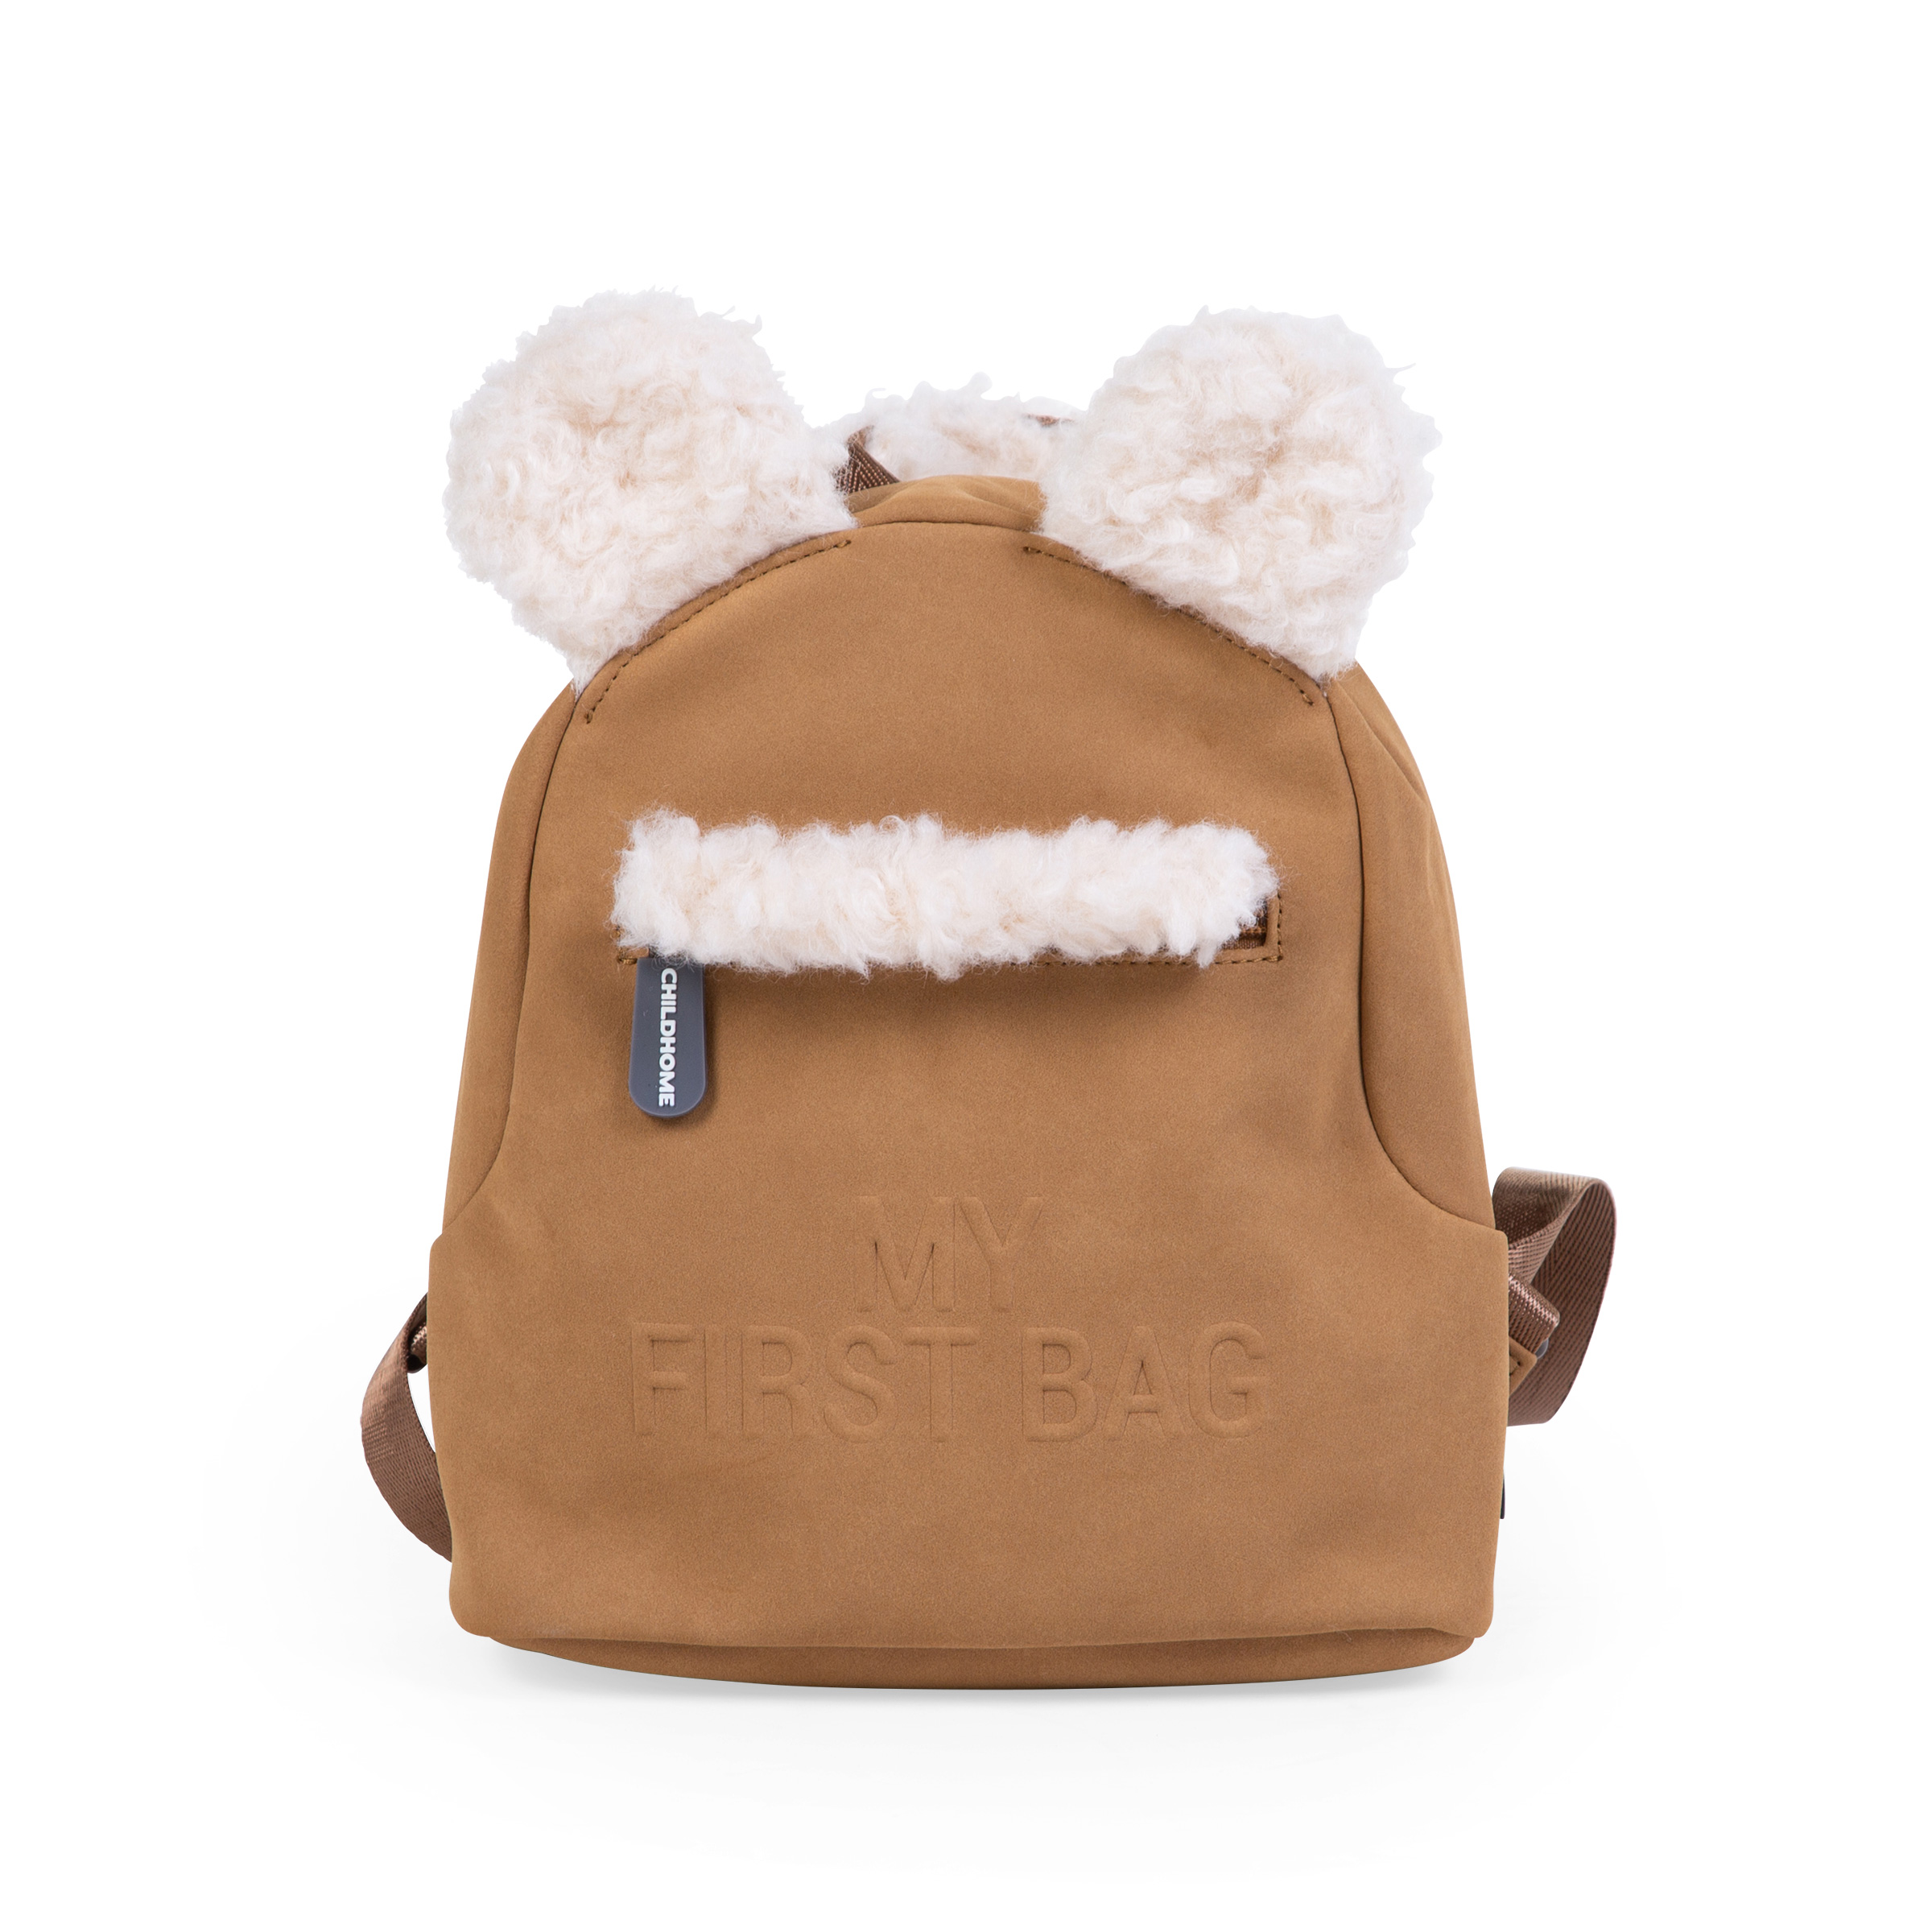 My First Bag Sac A Dos Pour Enfants - Suede-look